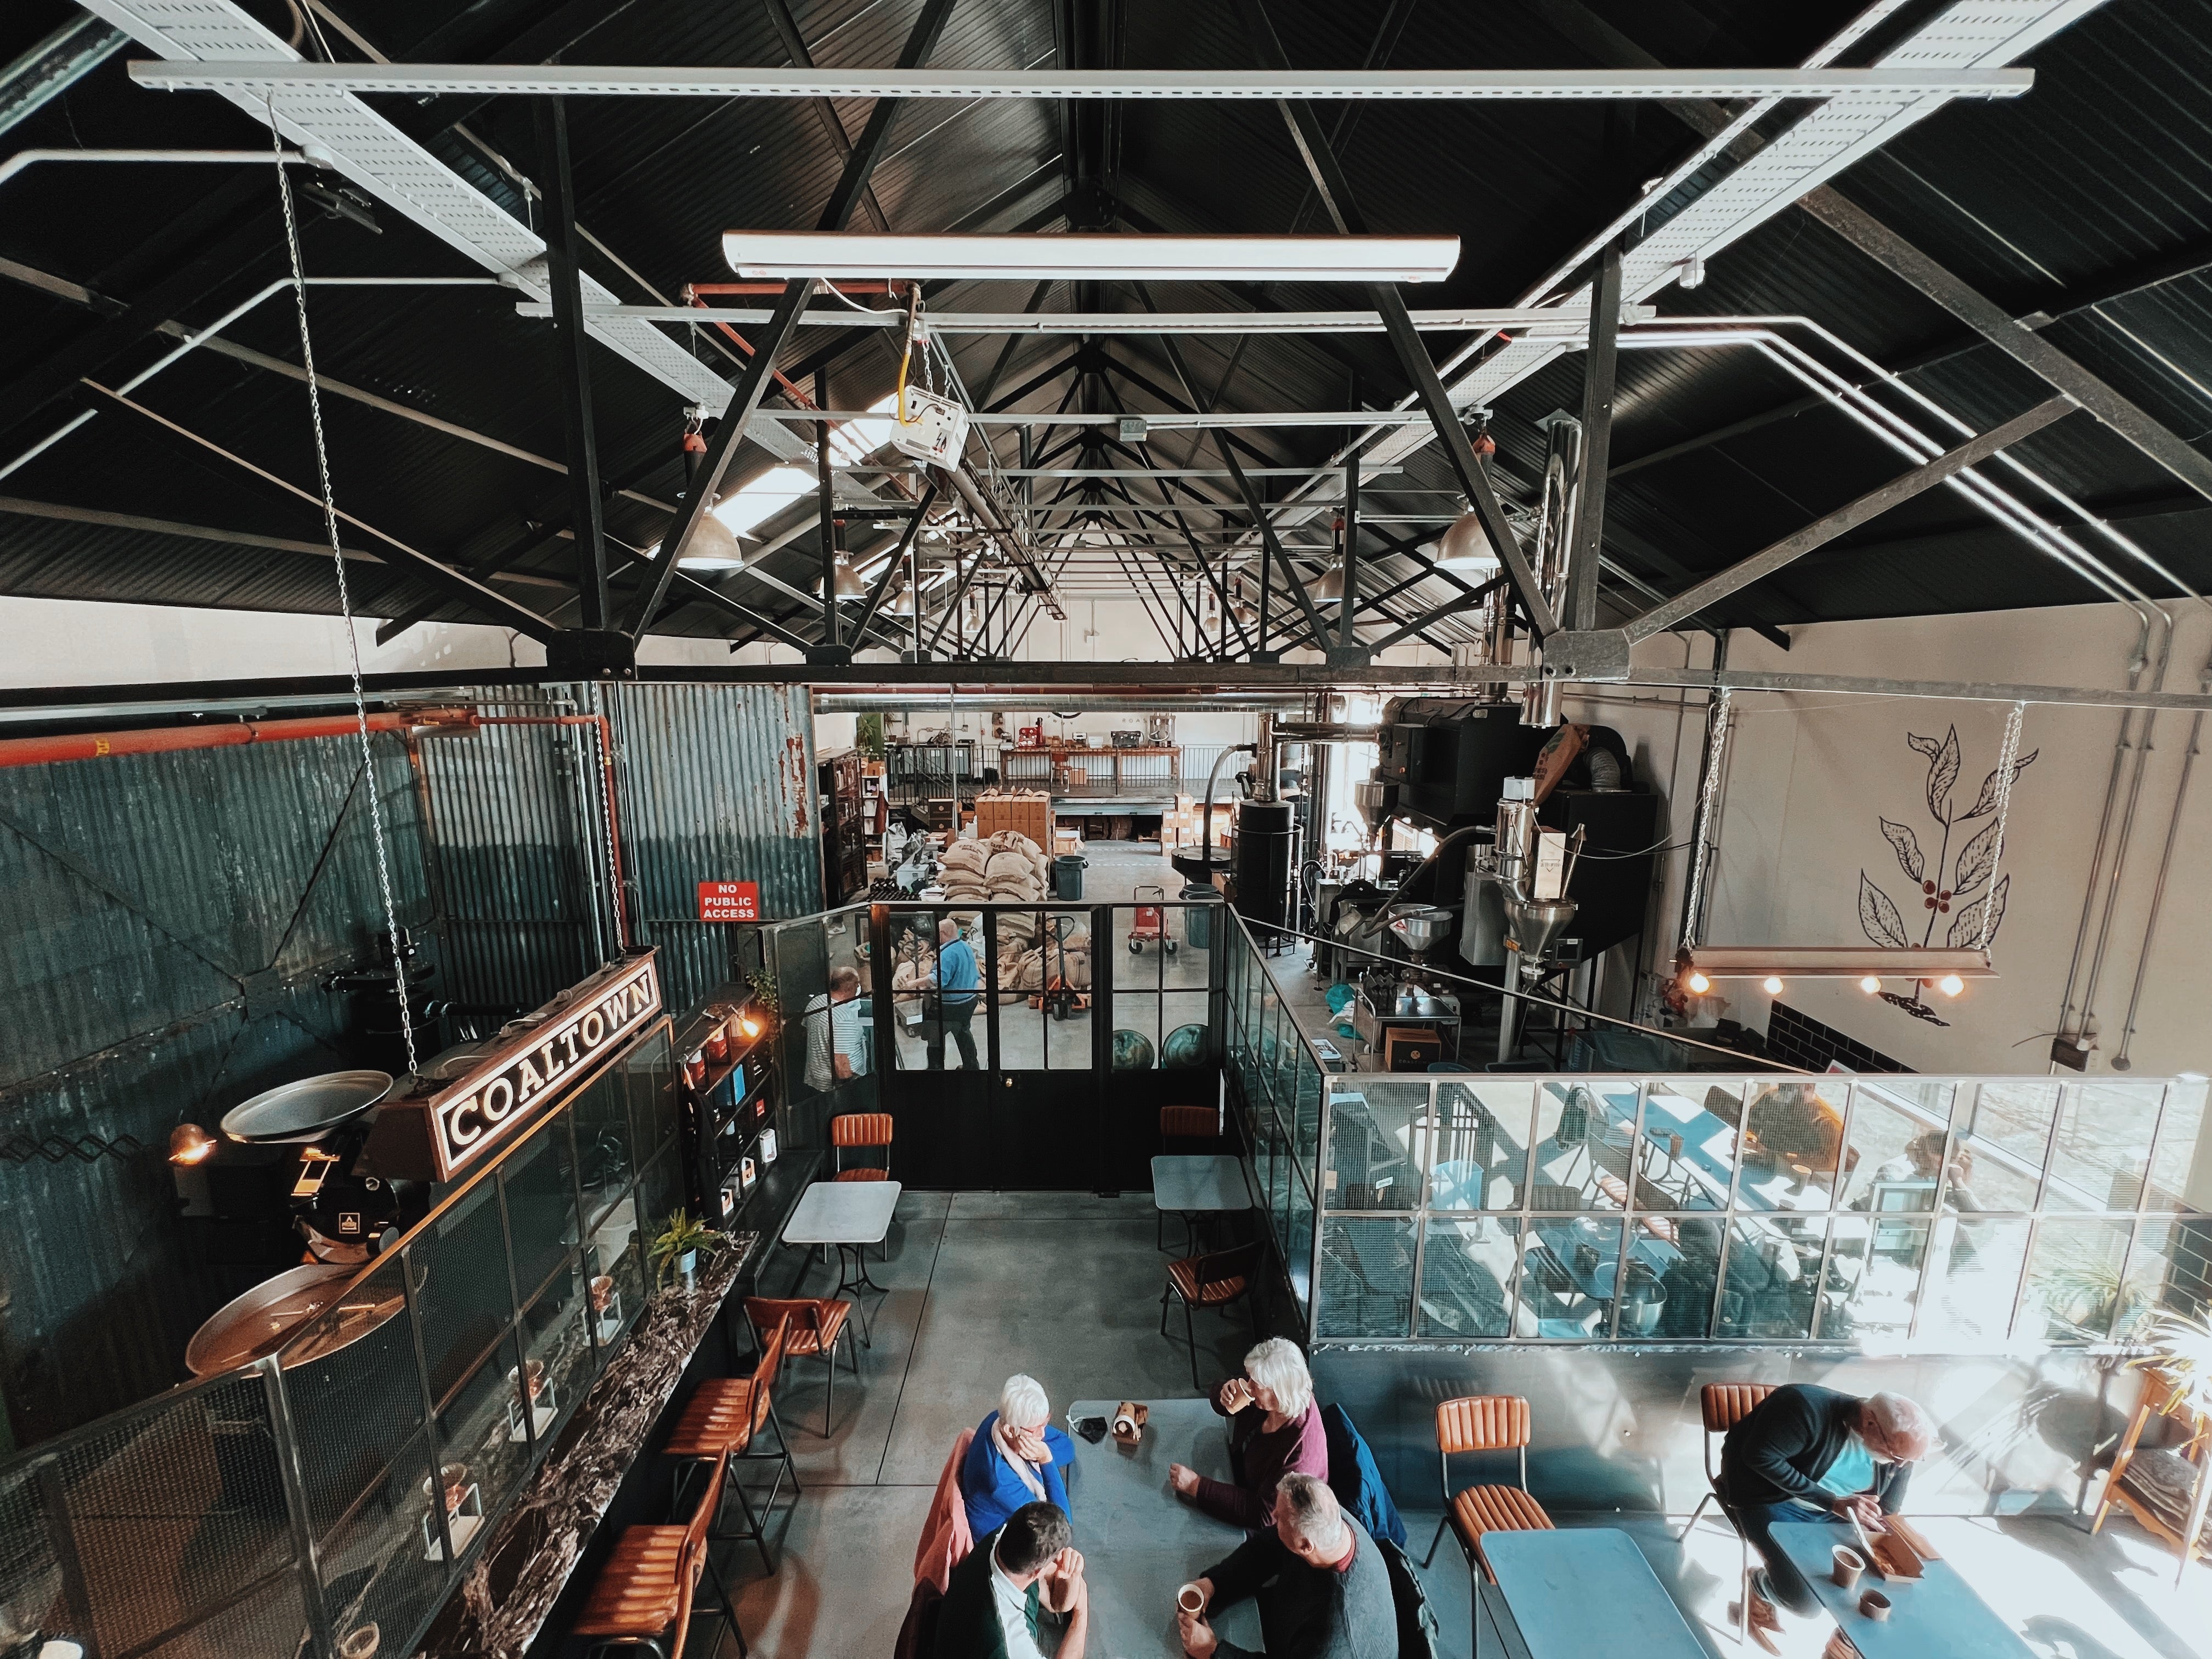 A view of Coaltown Coffee's Roastery and Espresso Bar, shot from the mezzanine 